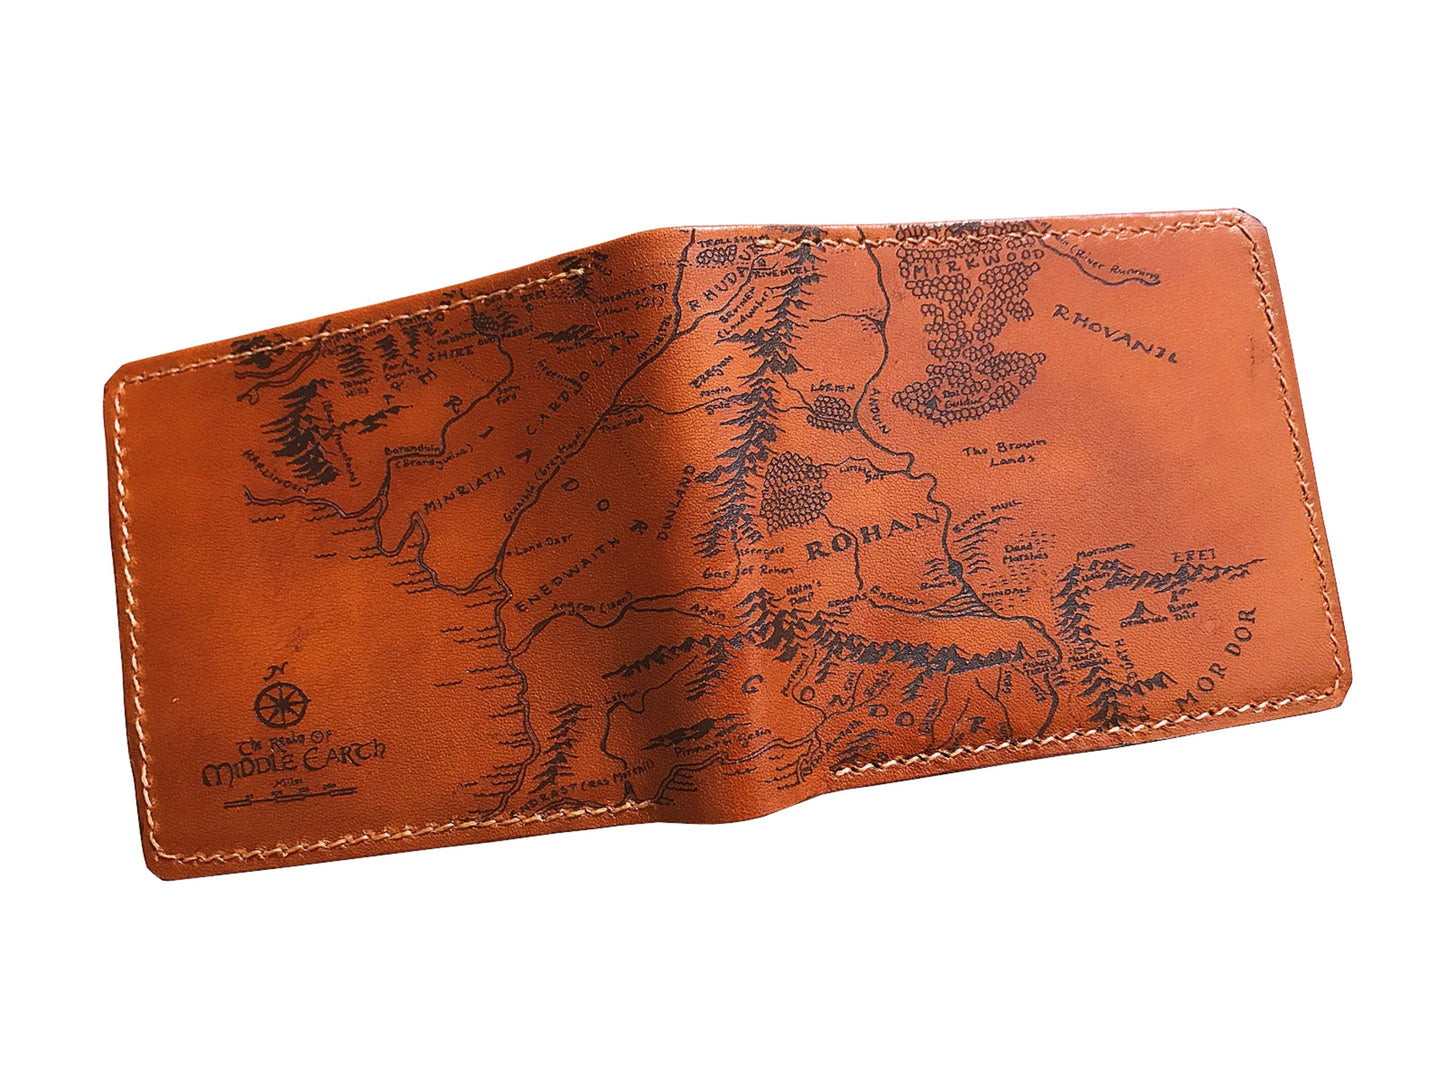 Mayan Corner - The Lord of the Rings middle Earth map men's wallet, men's gift, personalized gift for him, father boyfriend husband anniversary present